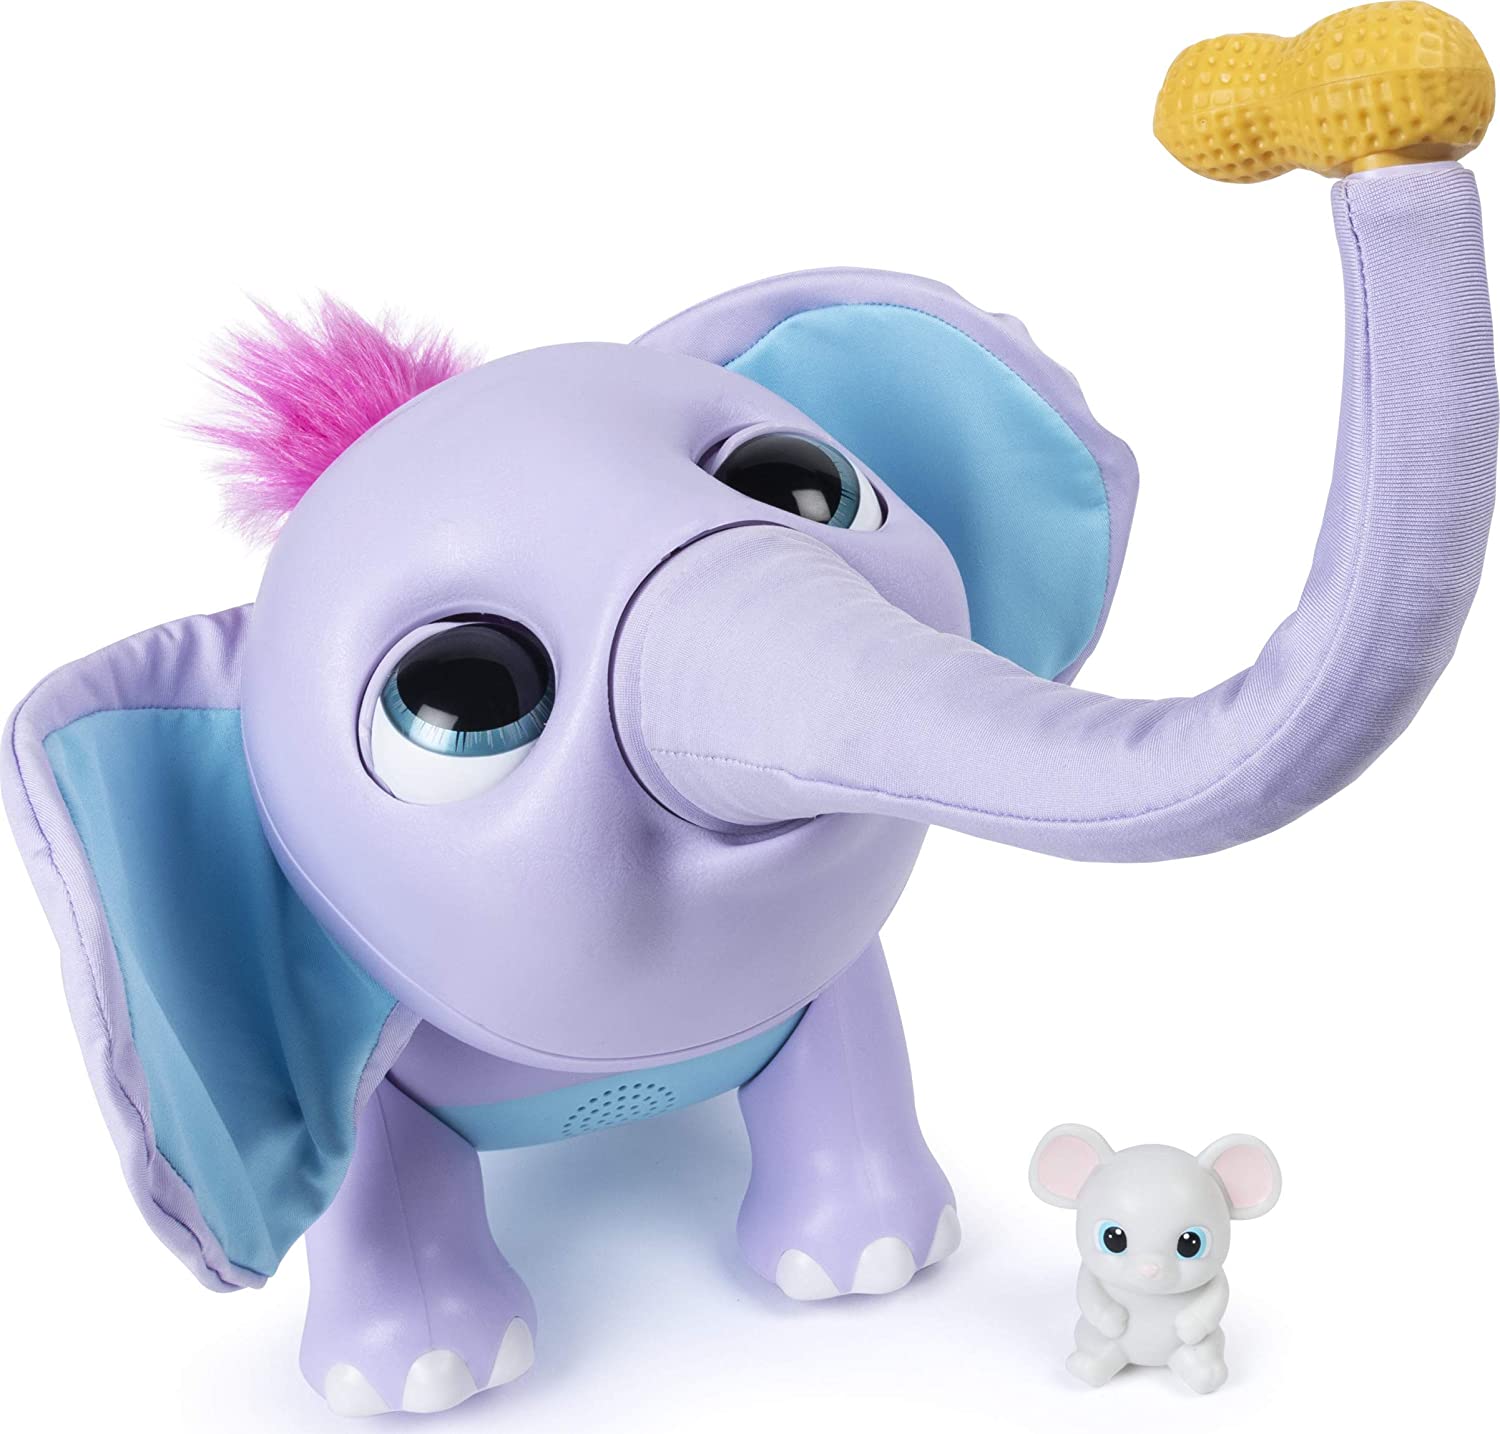 Juno My Baby Elephant w/ Interactive Moving Trunk & 150+ Sounds and Movements $40.30 + Free Shipping